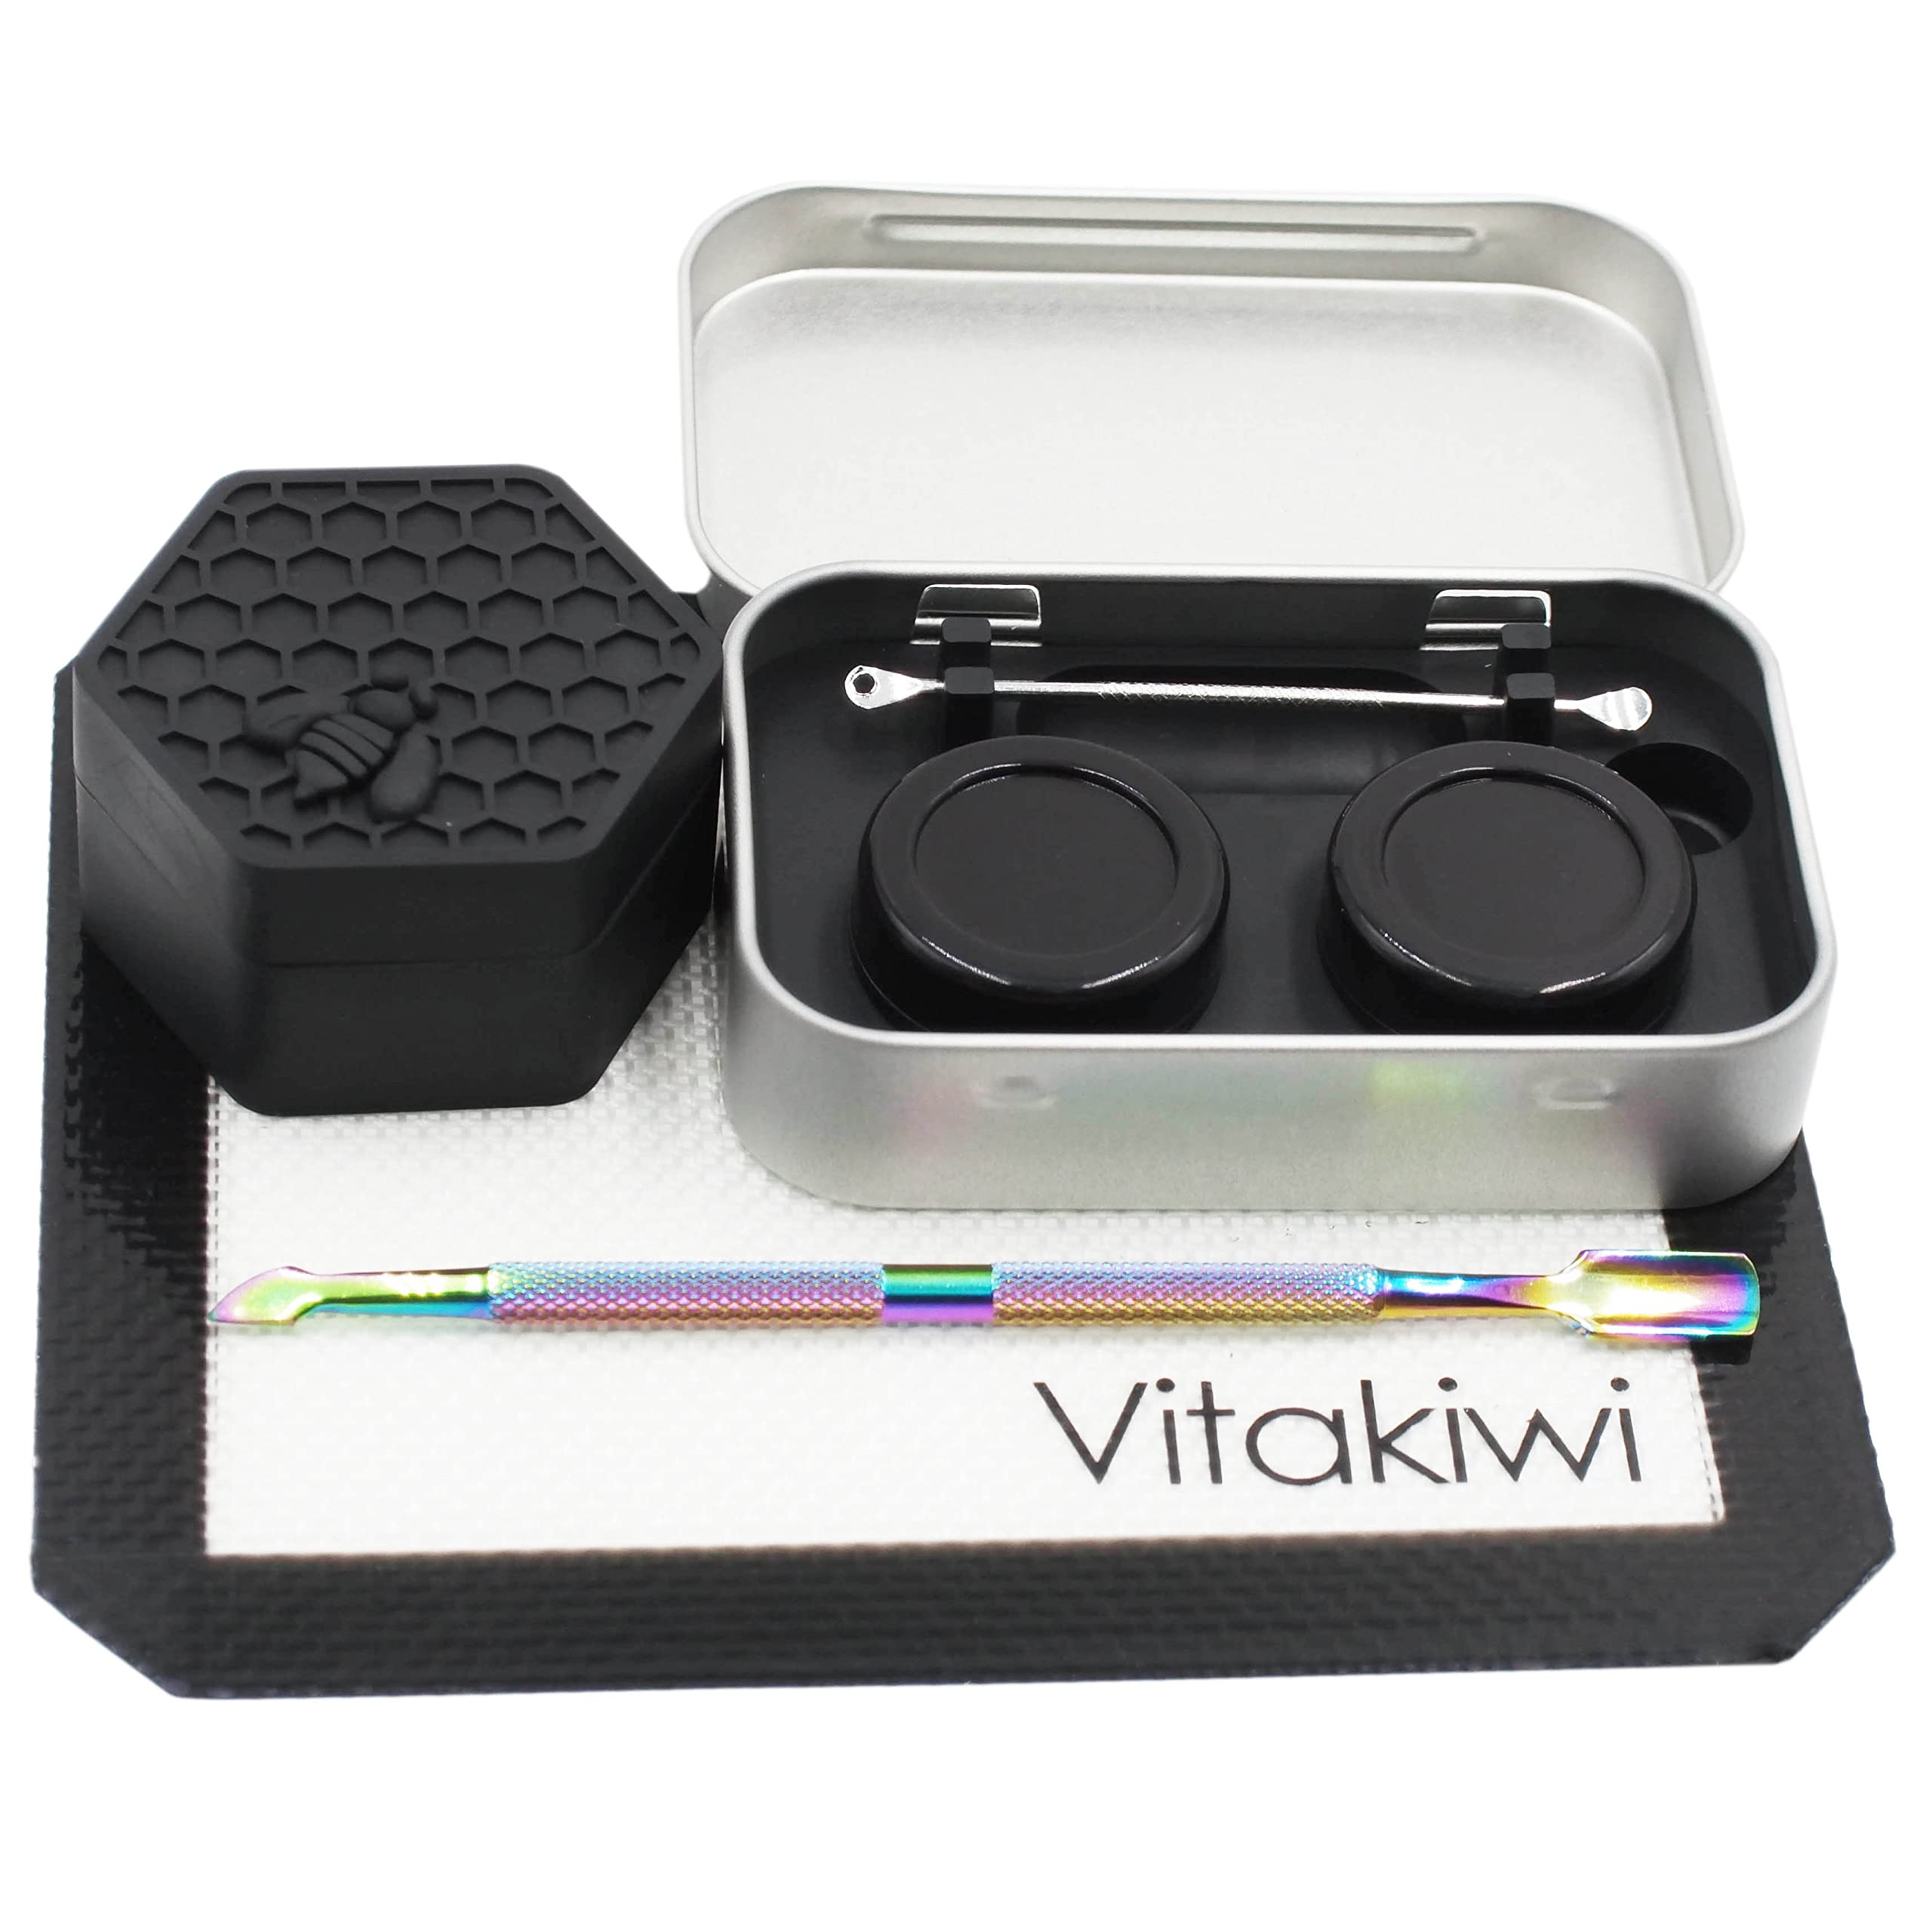 Vitakiwi Silicone Wax Carving Travel Kit with 5ml 26ml Honeybee Concentrate Containers + 5.2" Rainbow Tool + 5.9"×4.9" Mat + Tin Carrying Box (Black Color)